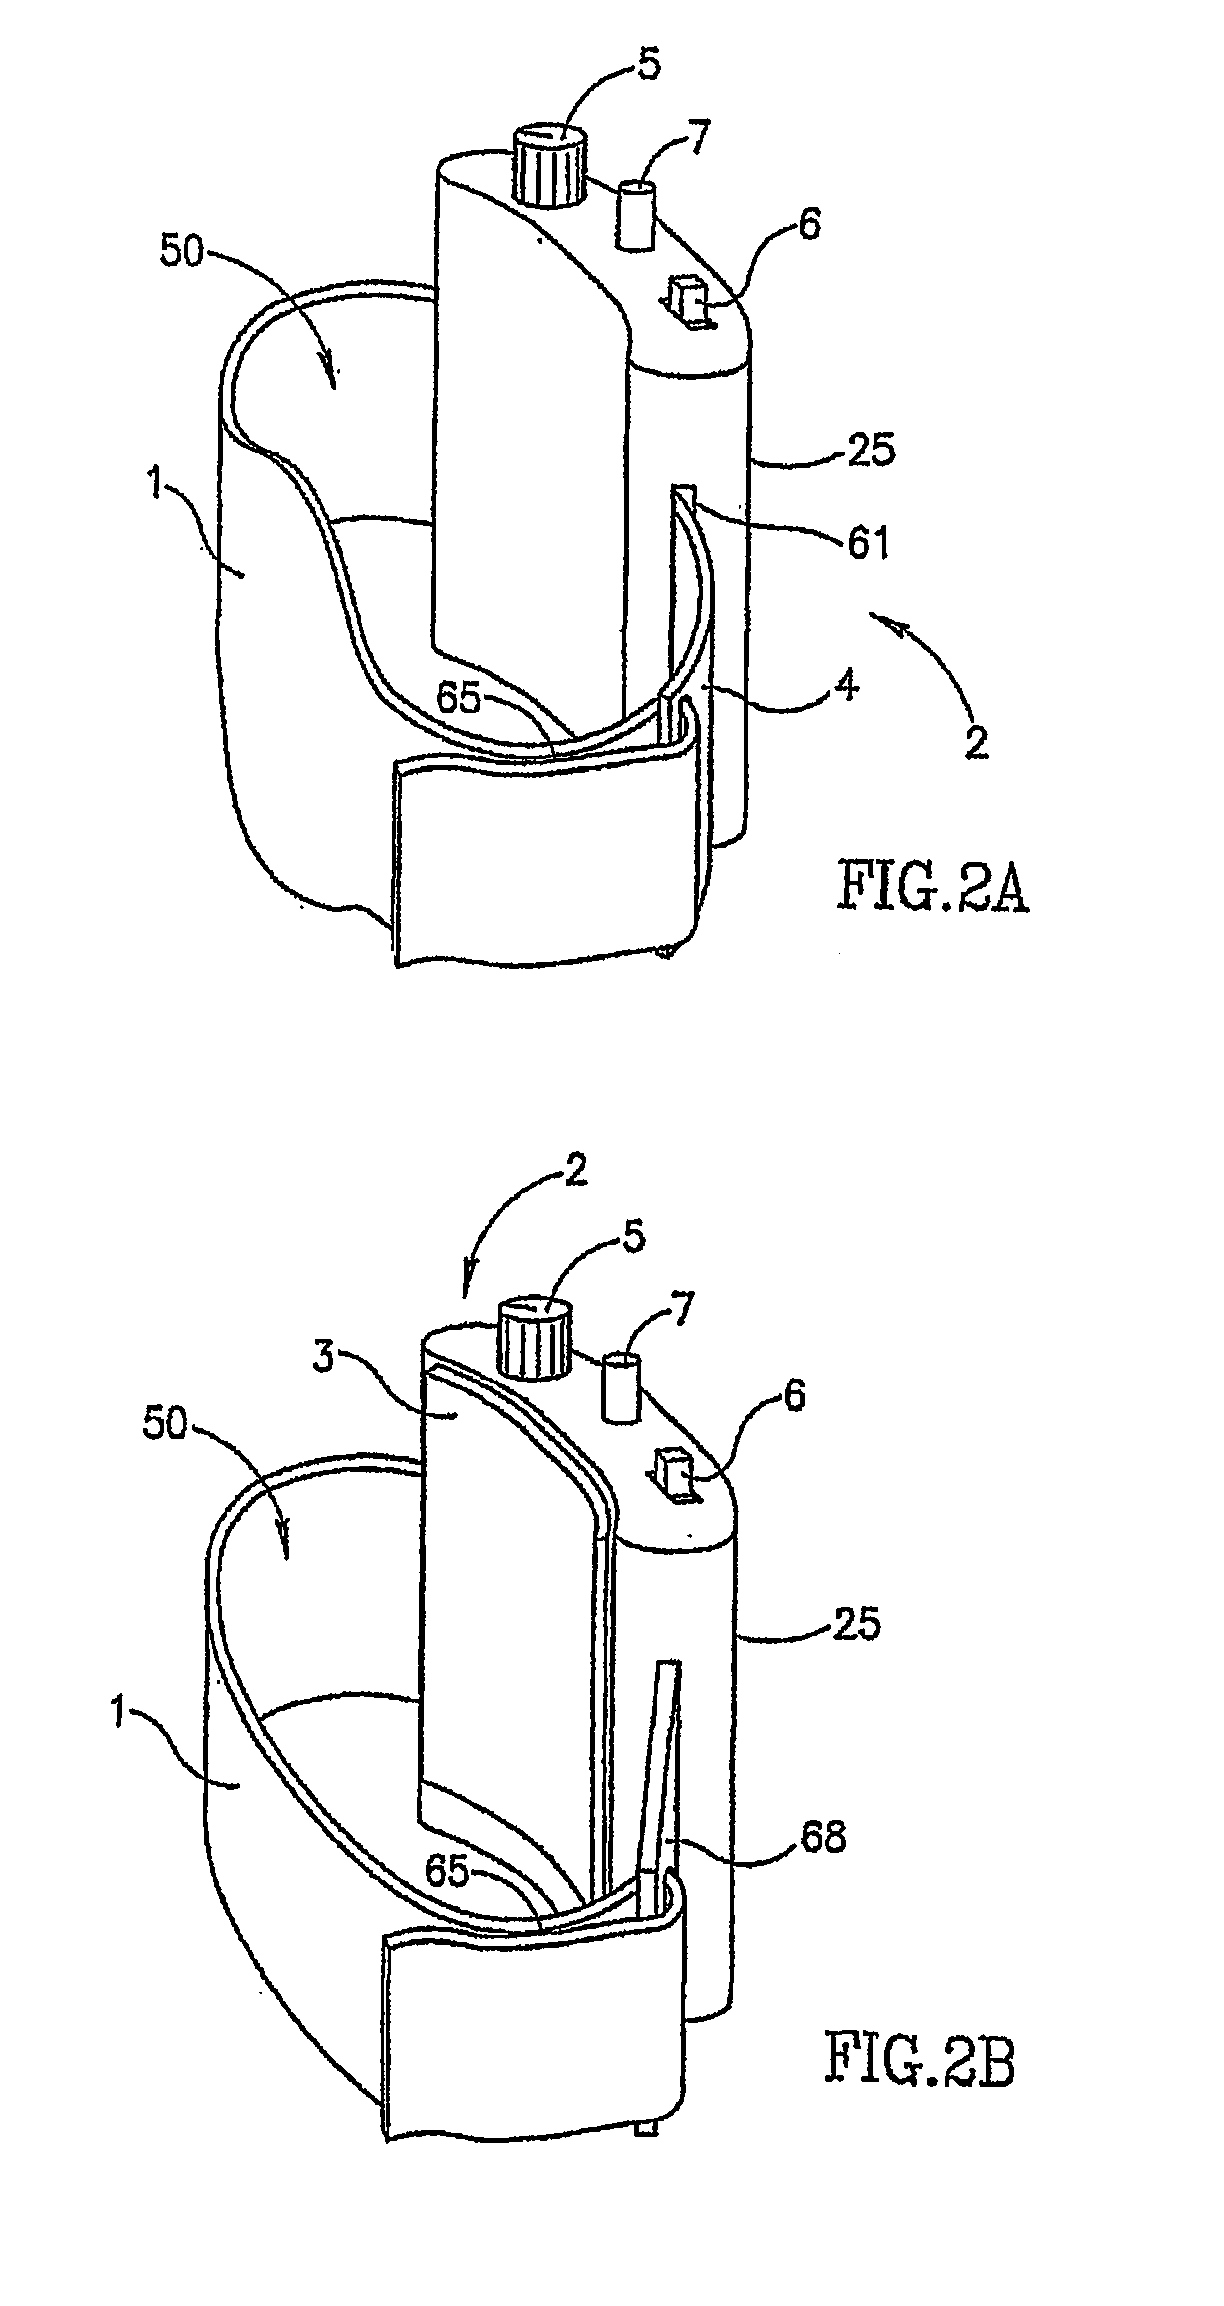 Method and system for external counterpulsation